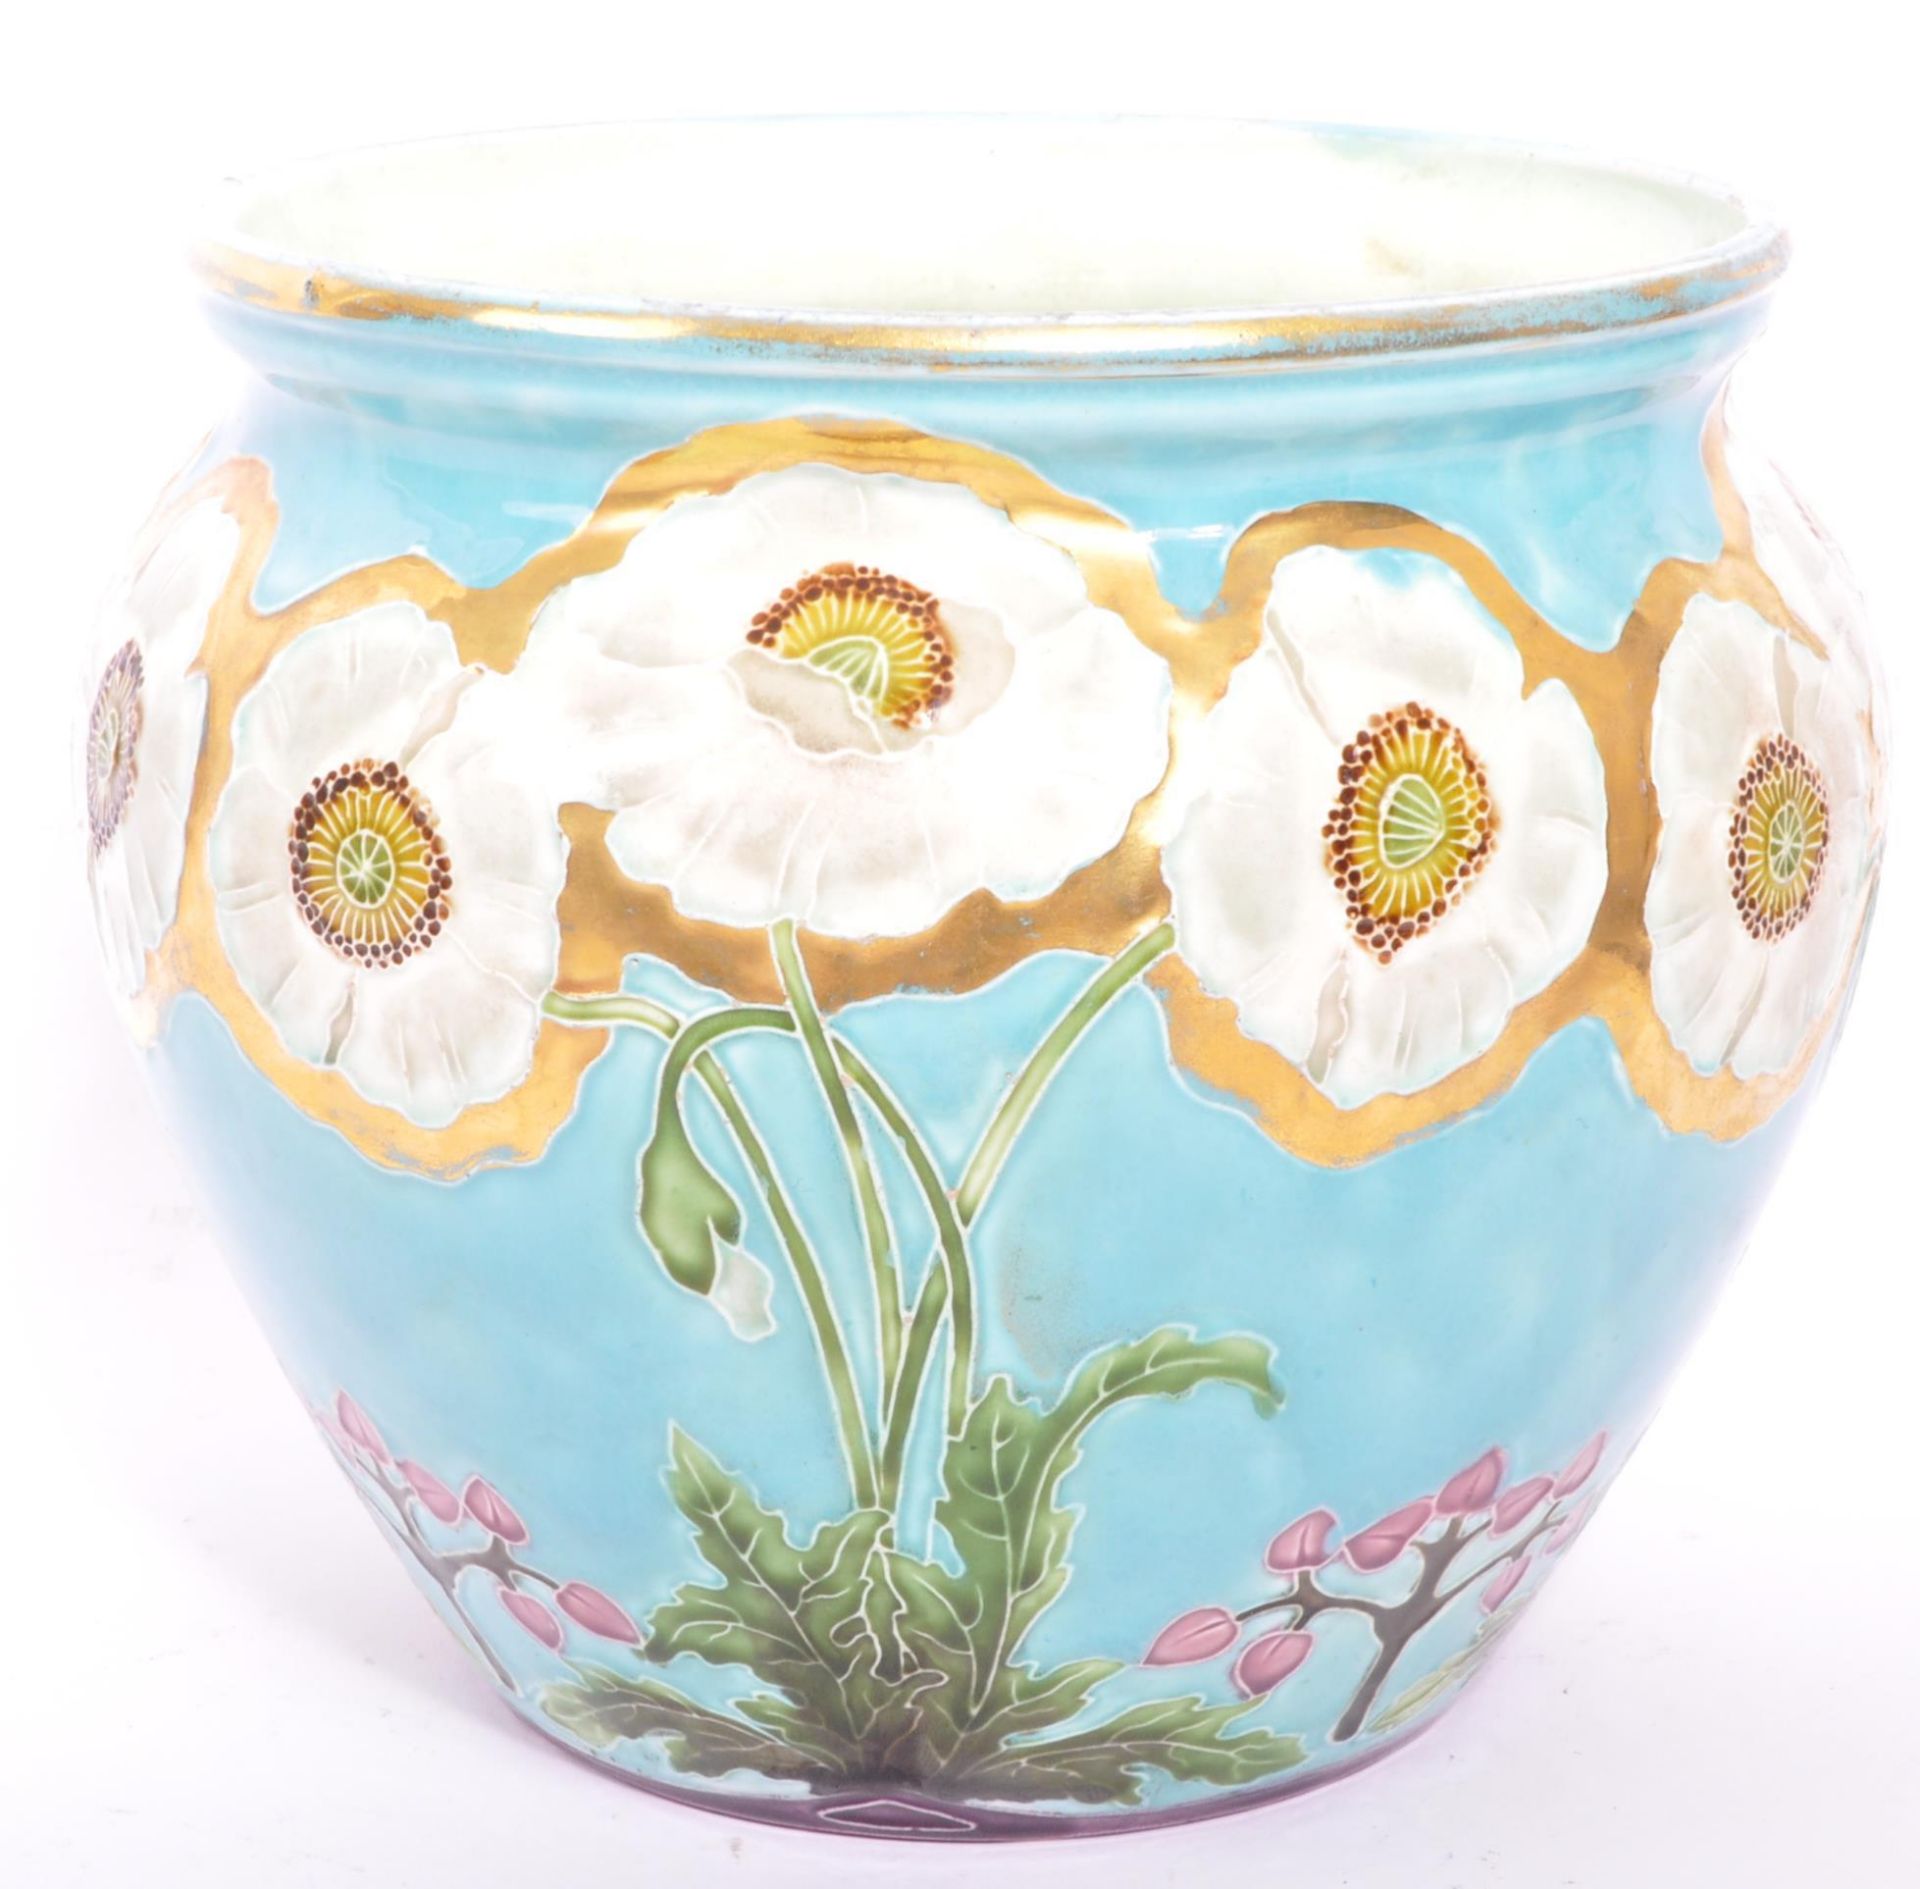 EARLY 20TH CENTURY EICHWALD POTTERY JARDINERE